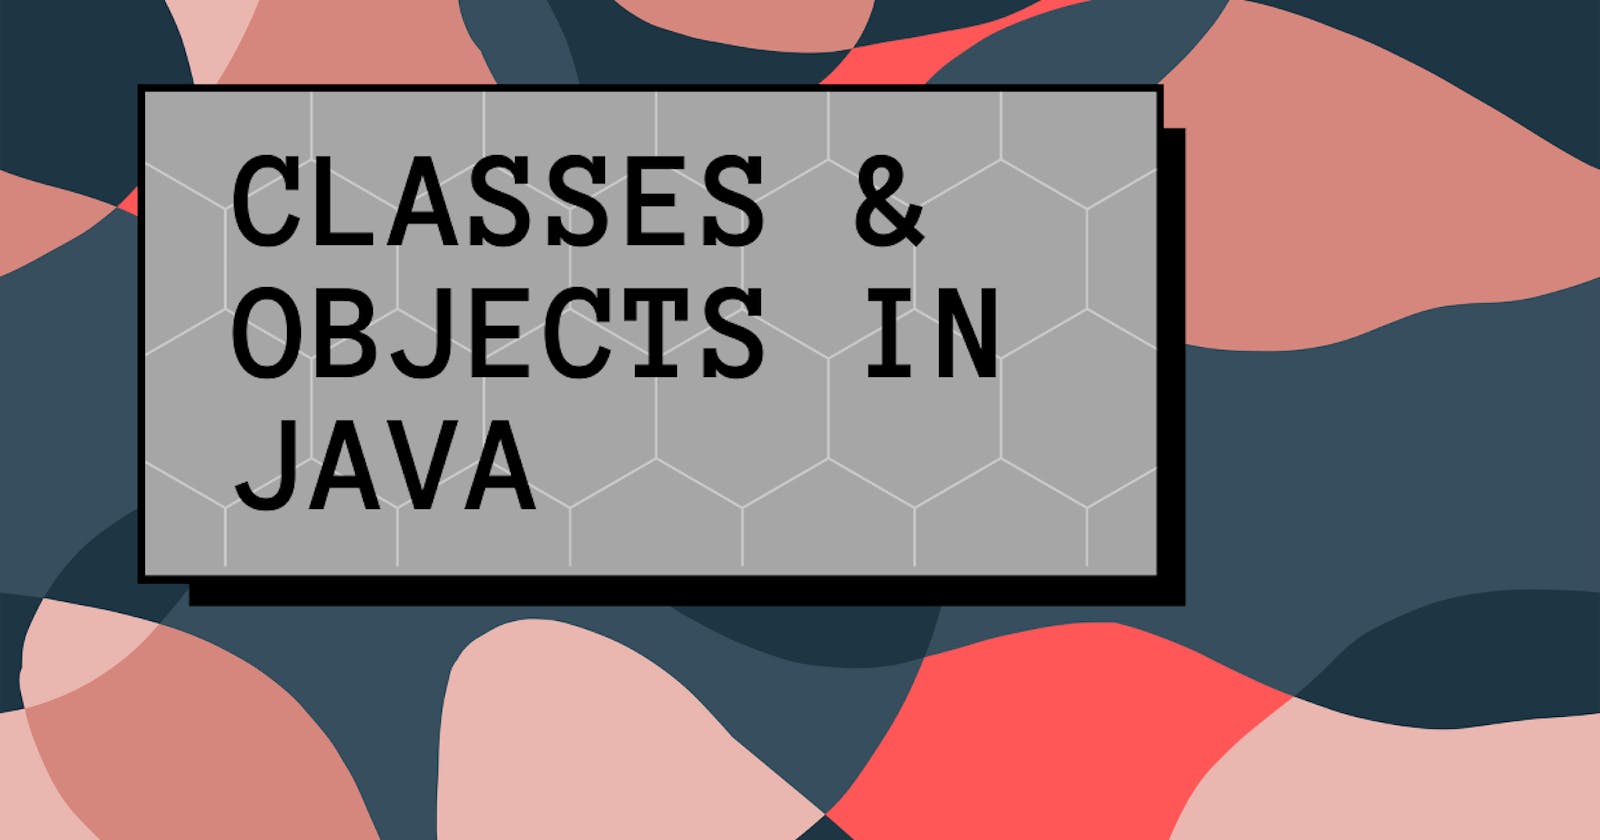 A beginner's guide to Classes and Objects in Java